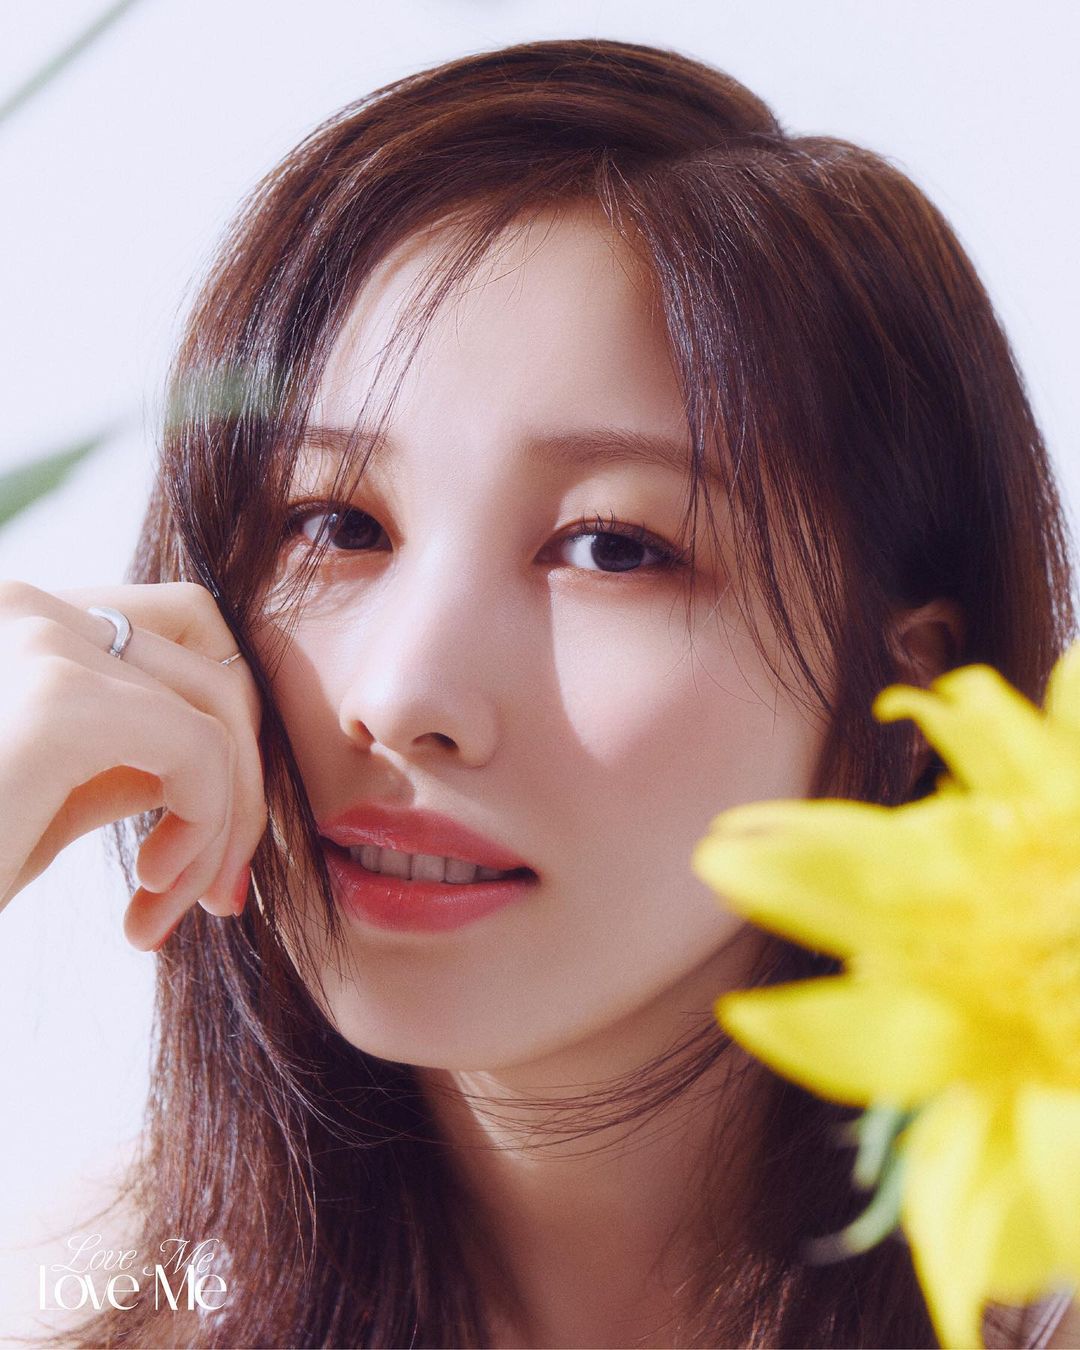 Kwon Jin-ah, 'Love Me Love Me' released on the 10th...Confession of a summer day